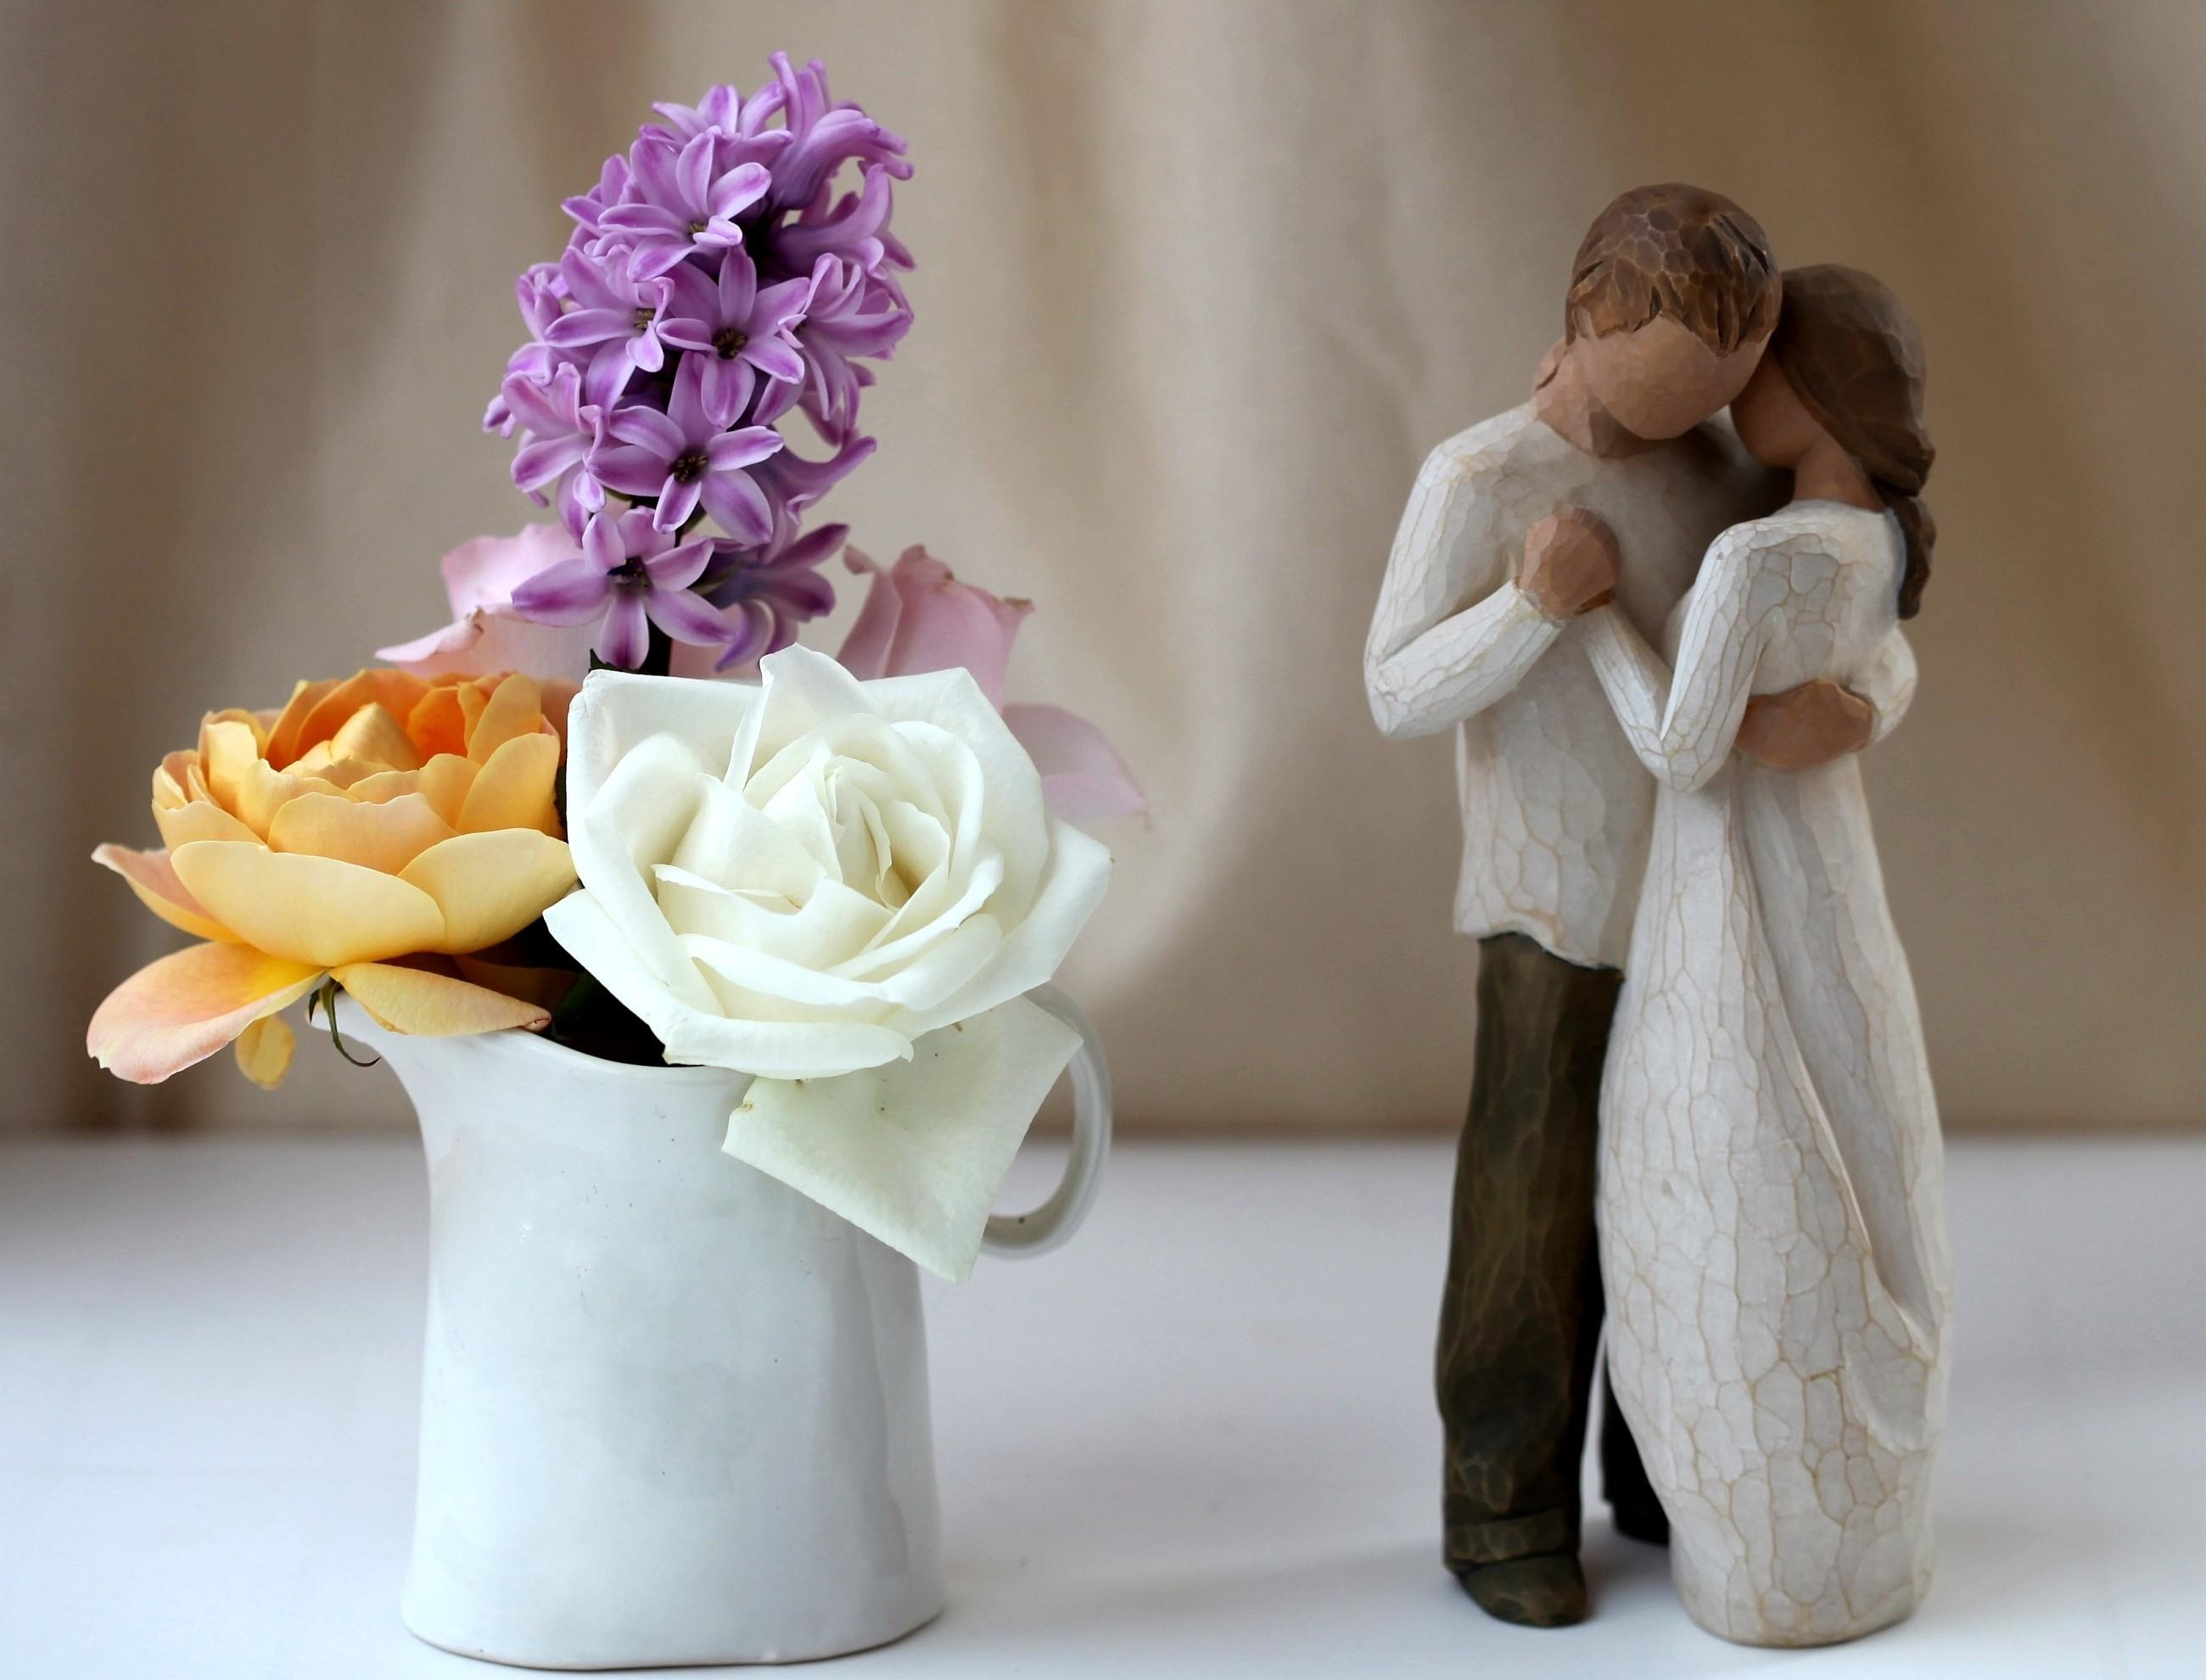 couple, flowers, roses, hyacinth, pair, statuette, embrace